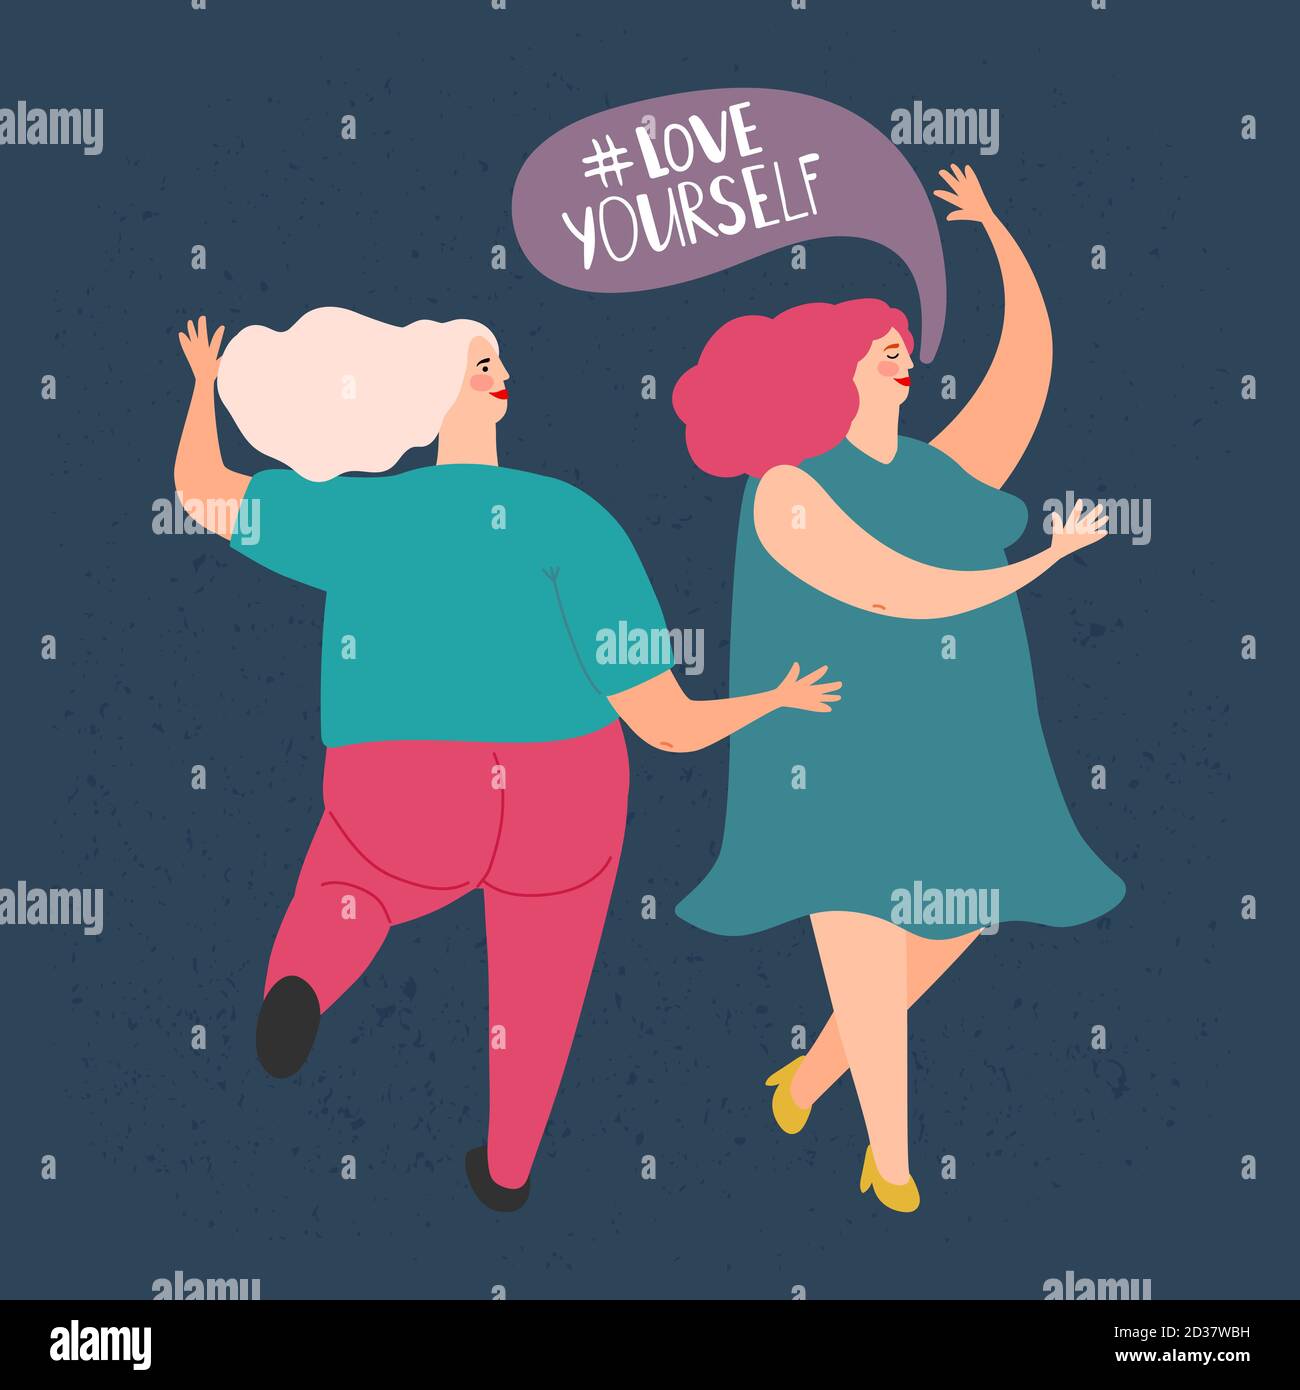 Two plump dancing women. Vector love yourself concept. Illustration of young woman merriment, pretty attractive Stock Vector